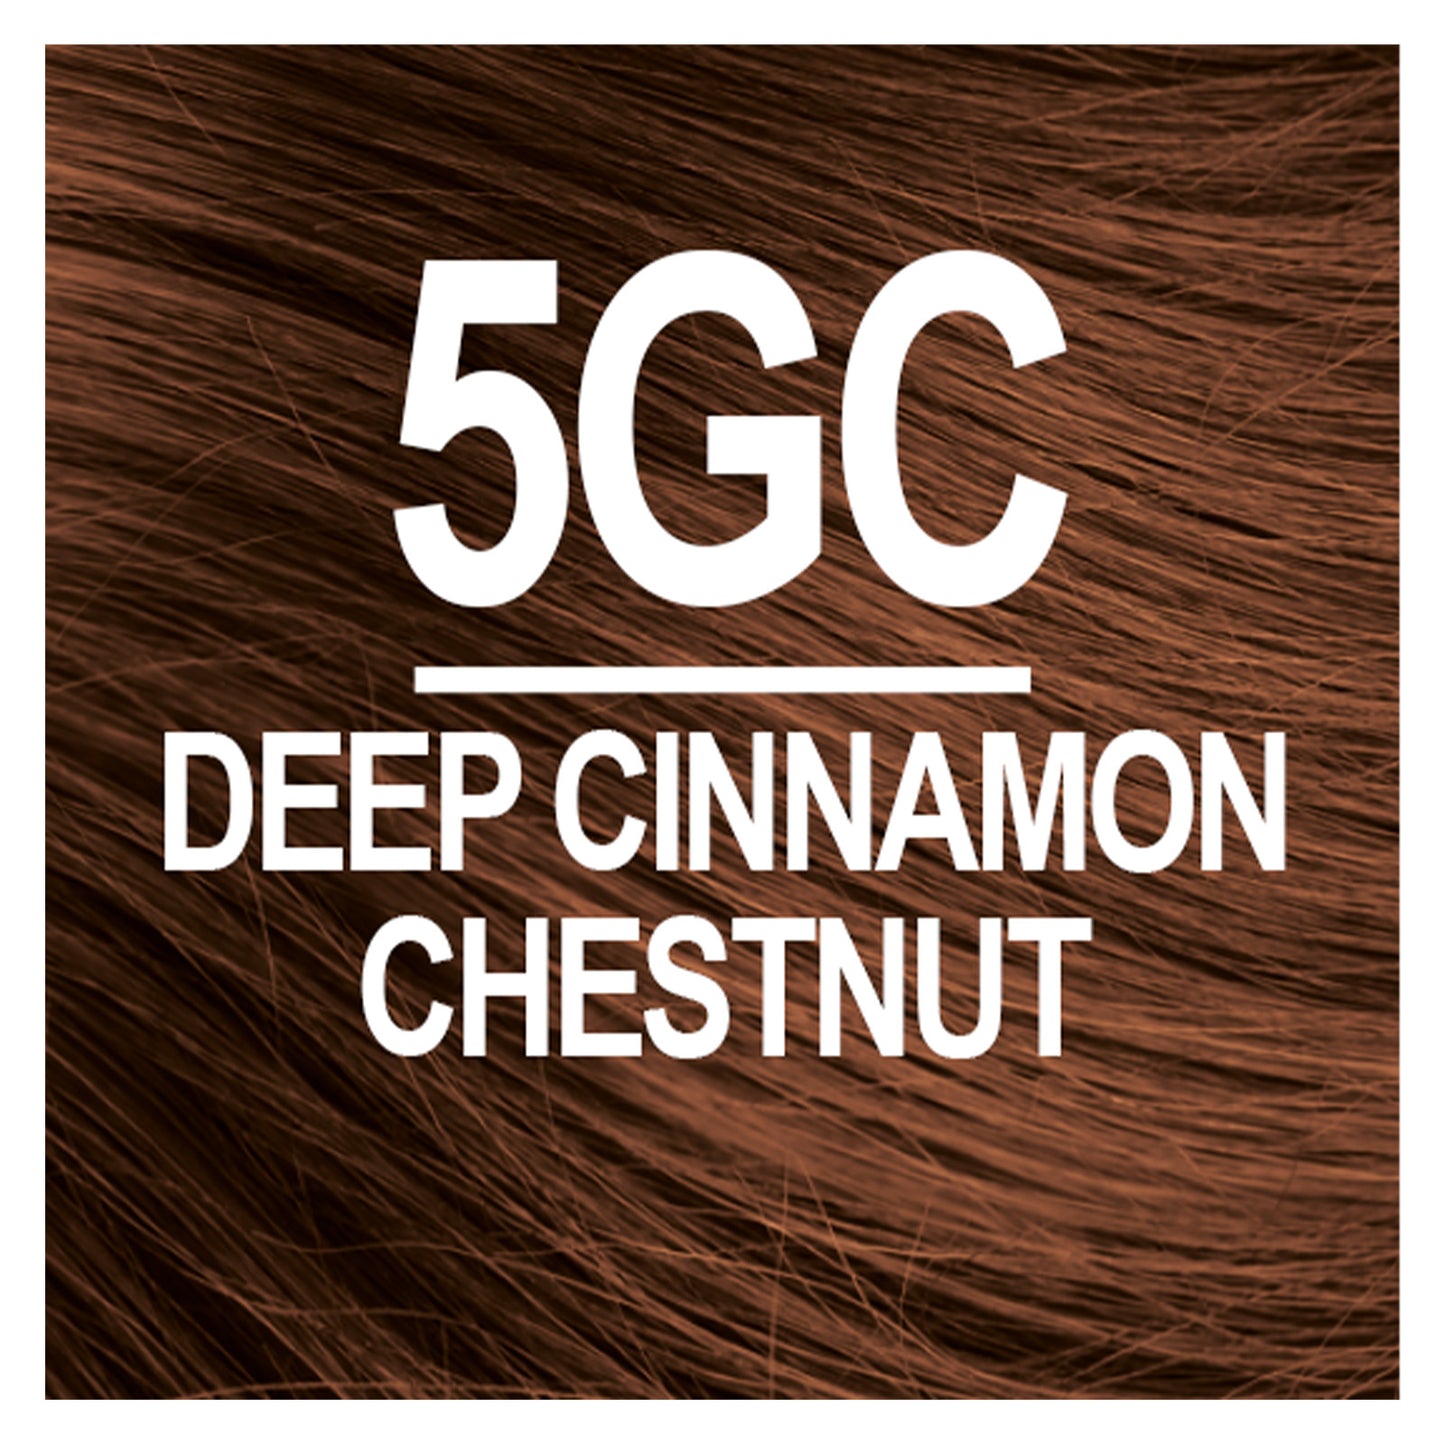 Naturtint Permanent Hair Color 5GC Deep Cinnamon Chestnut (Packaging may vary)